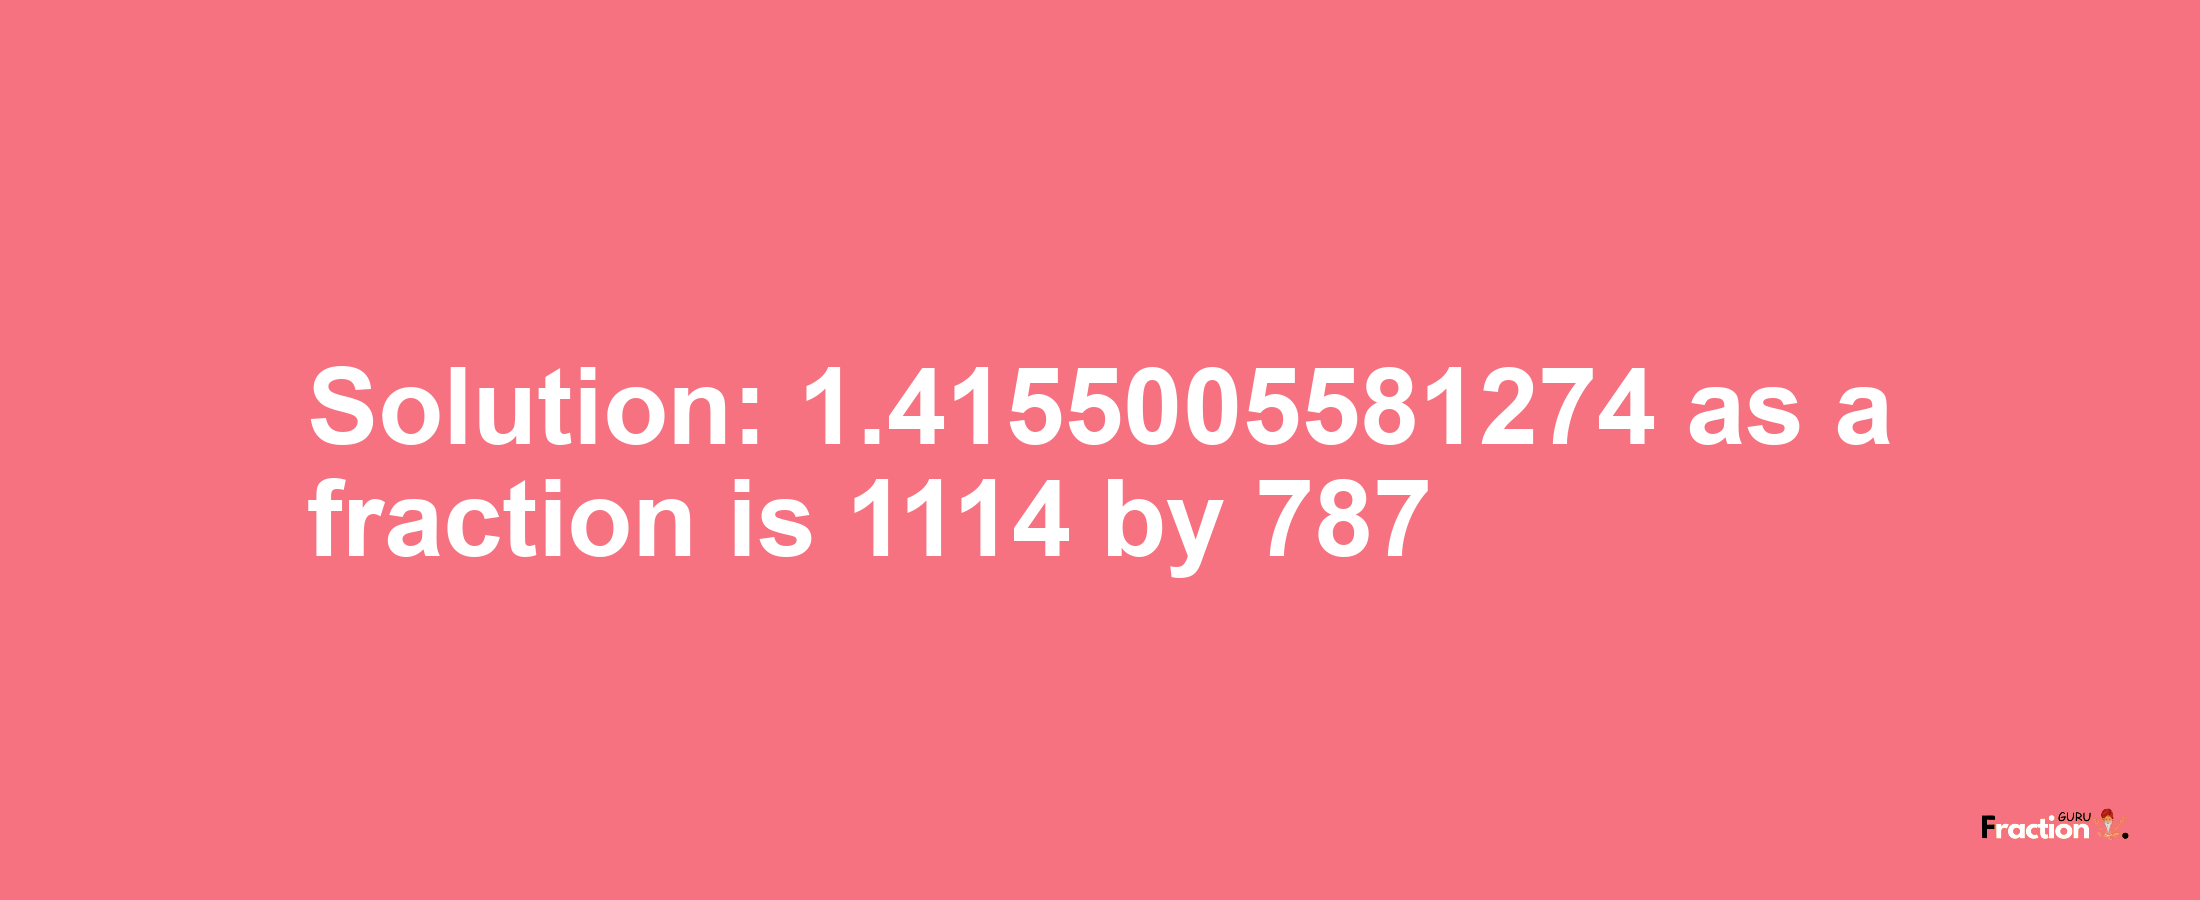 Solution:1.4155005581274 as a fraction is 1114/787